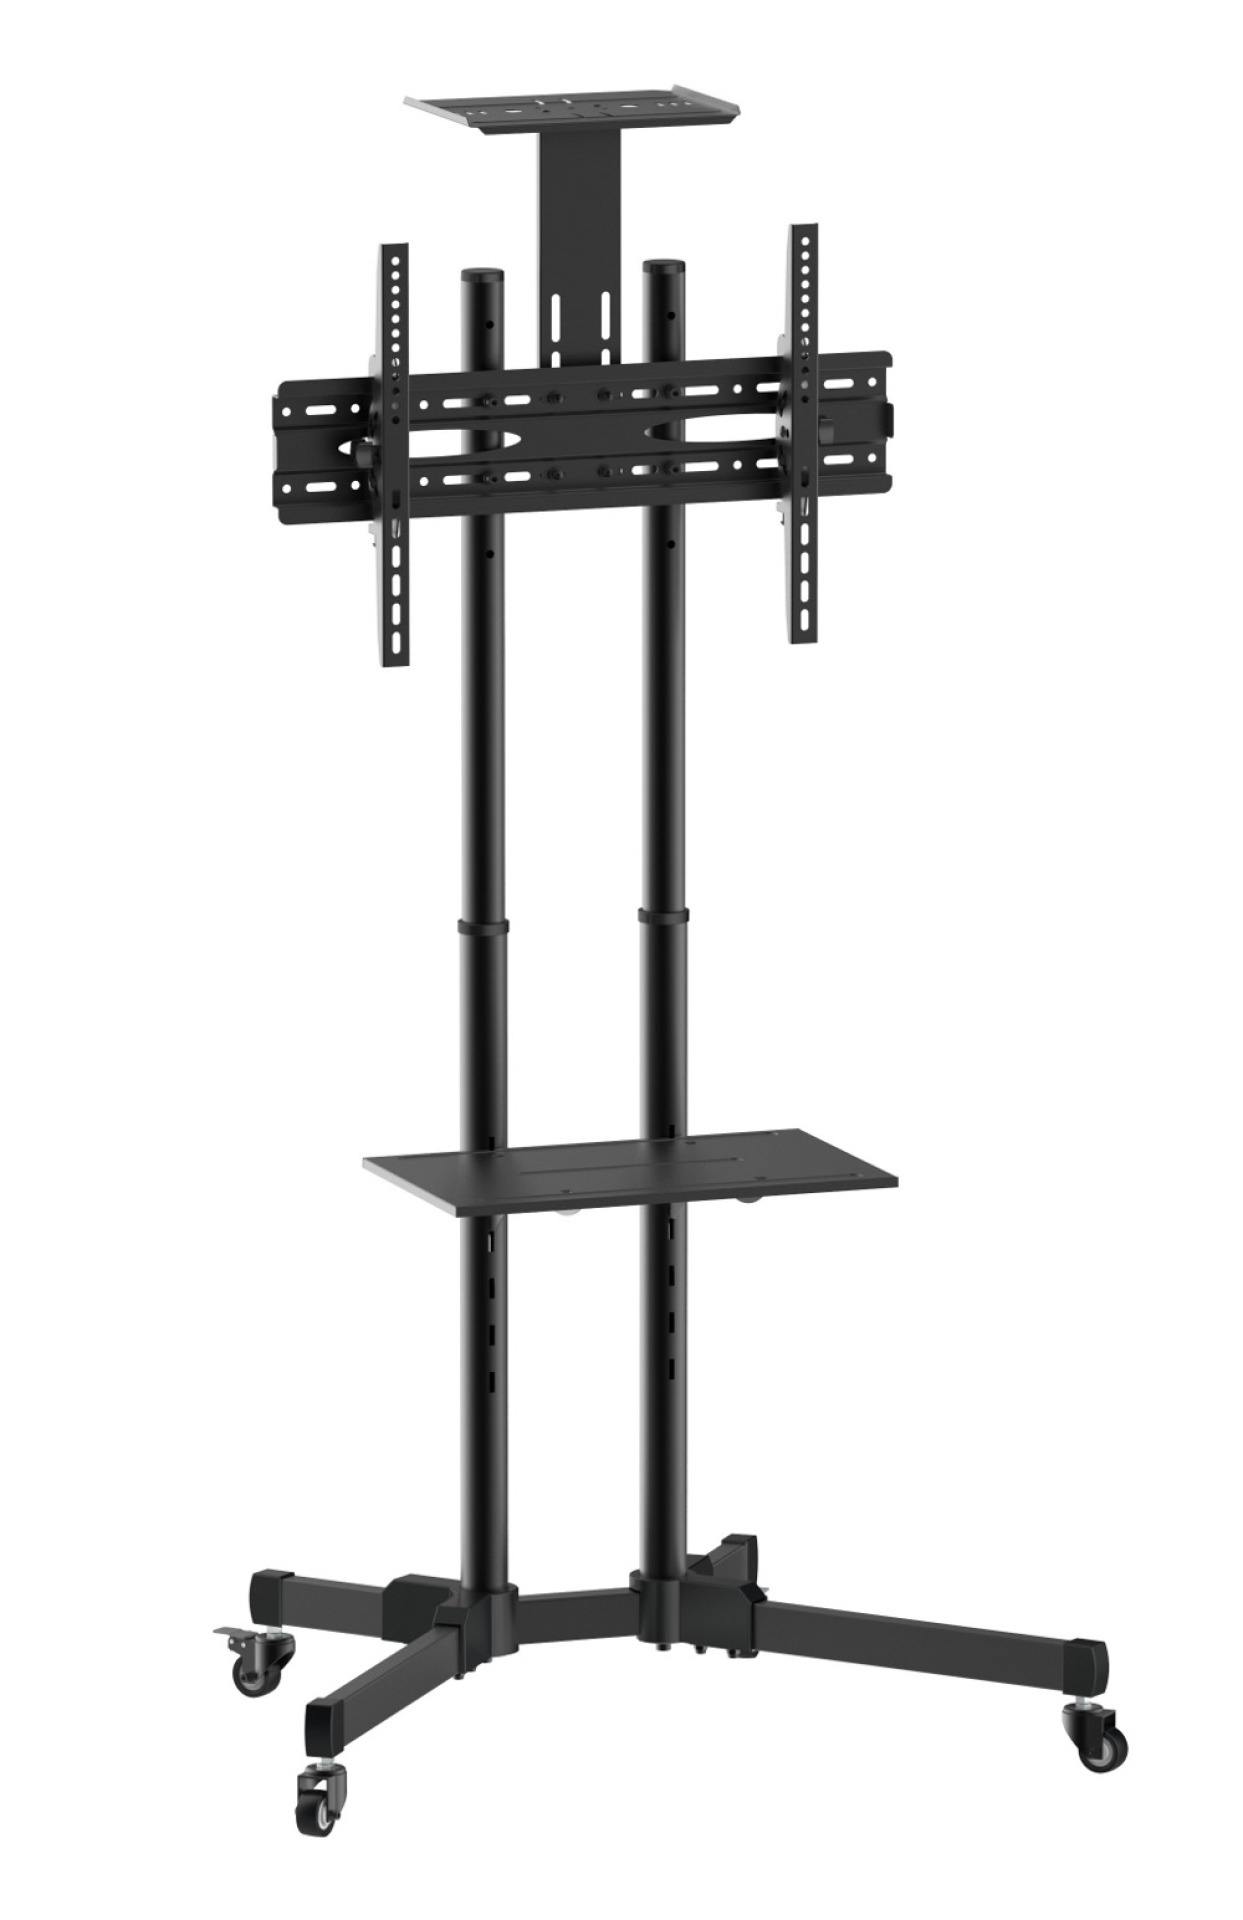 Trolley floor support for LCD LED TV 37-70", with two shelf